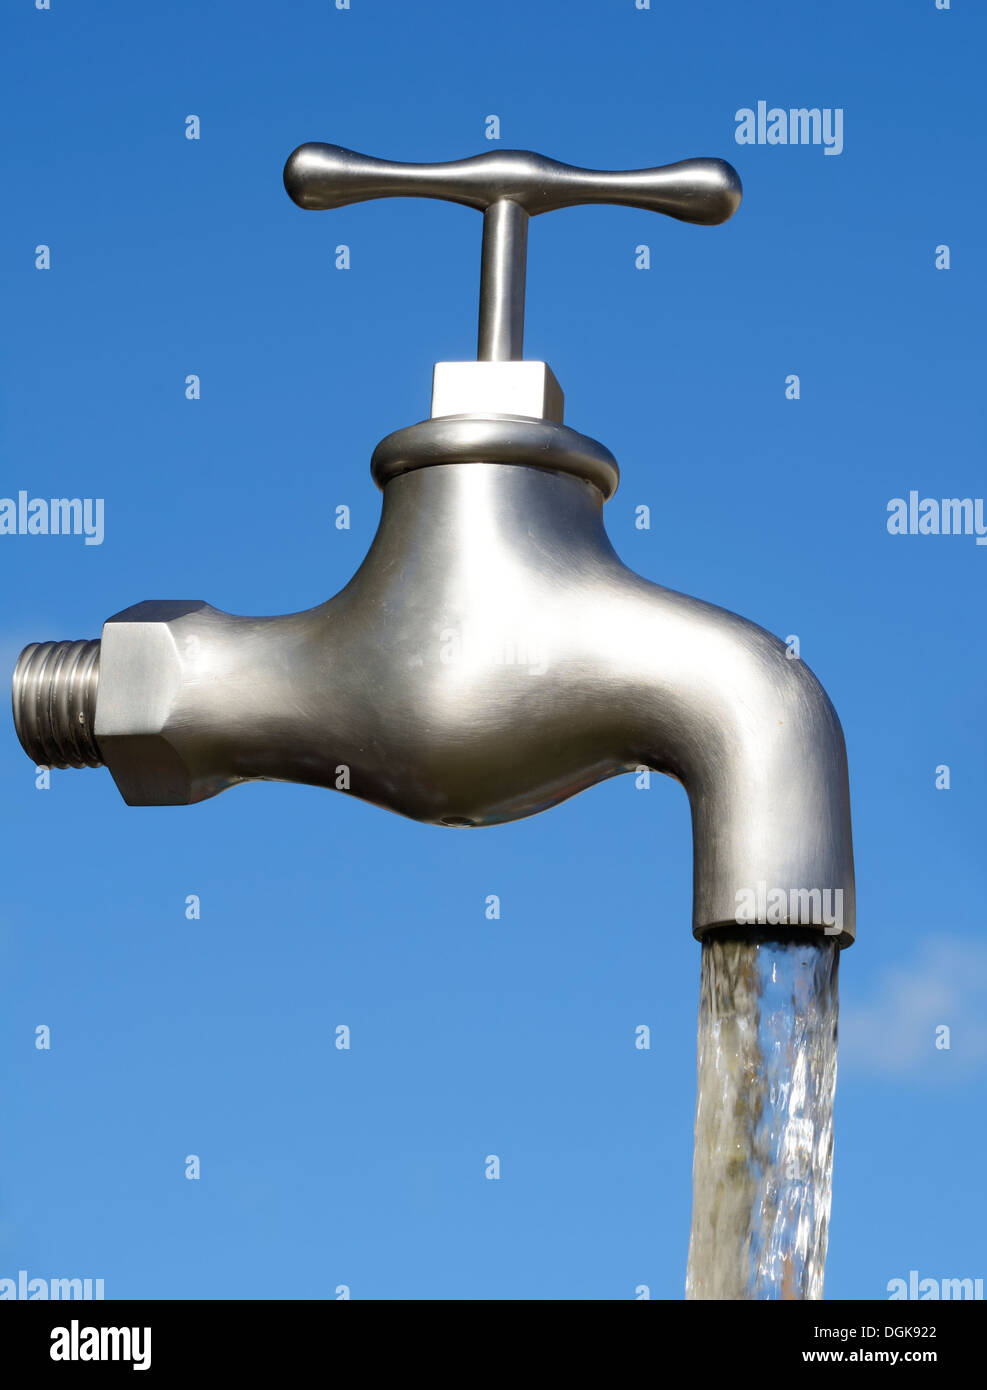 Illusion with a magic faucet and flowing water Stock Photo - Alamy